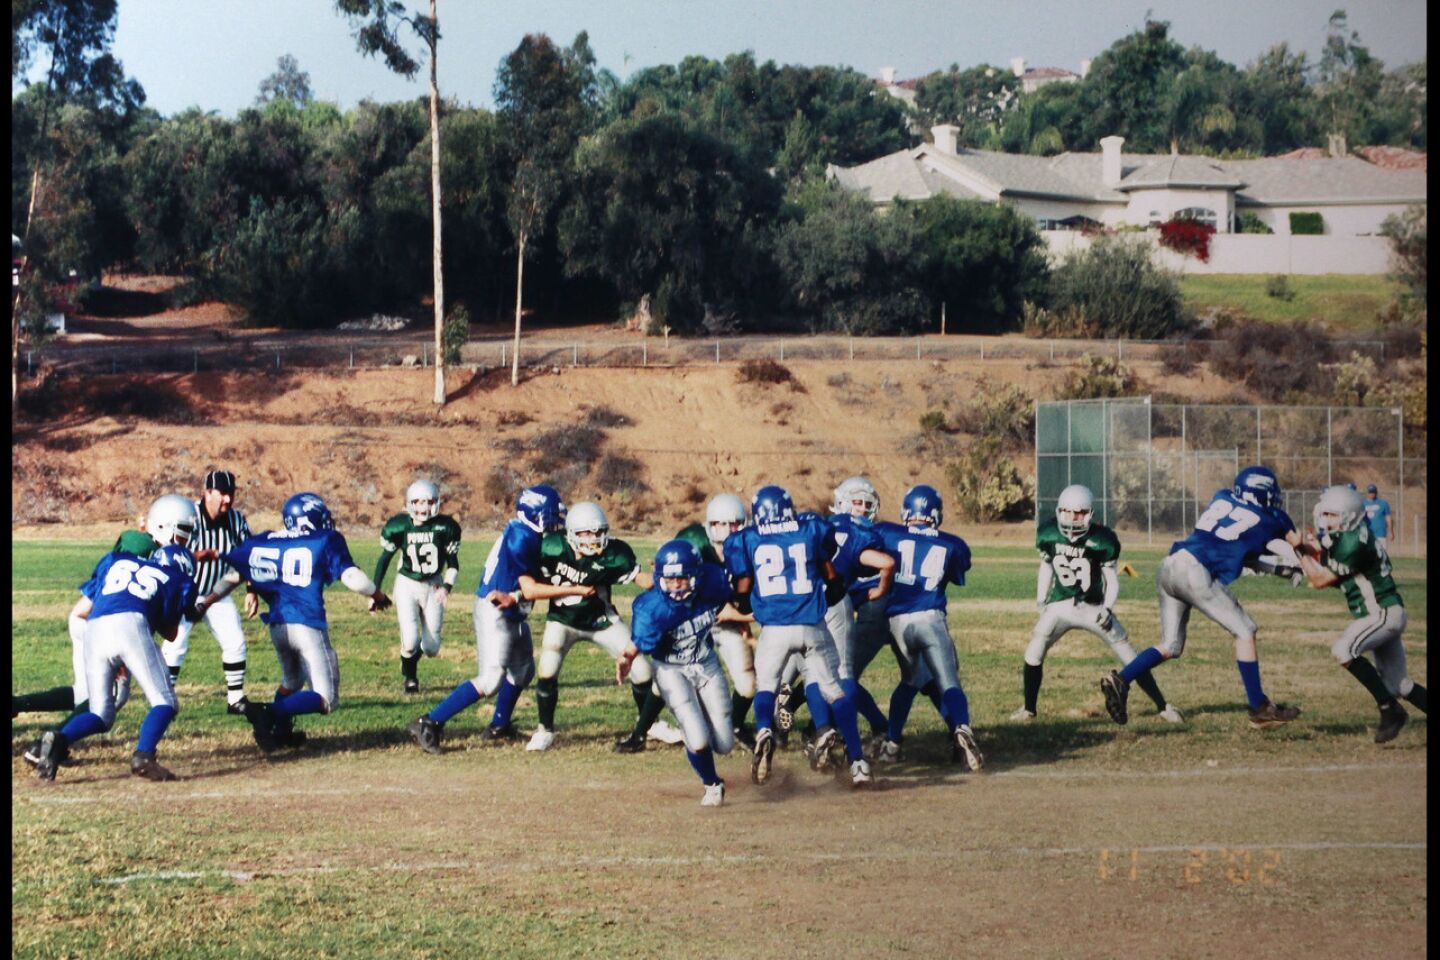 Youth football and CTE